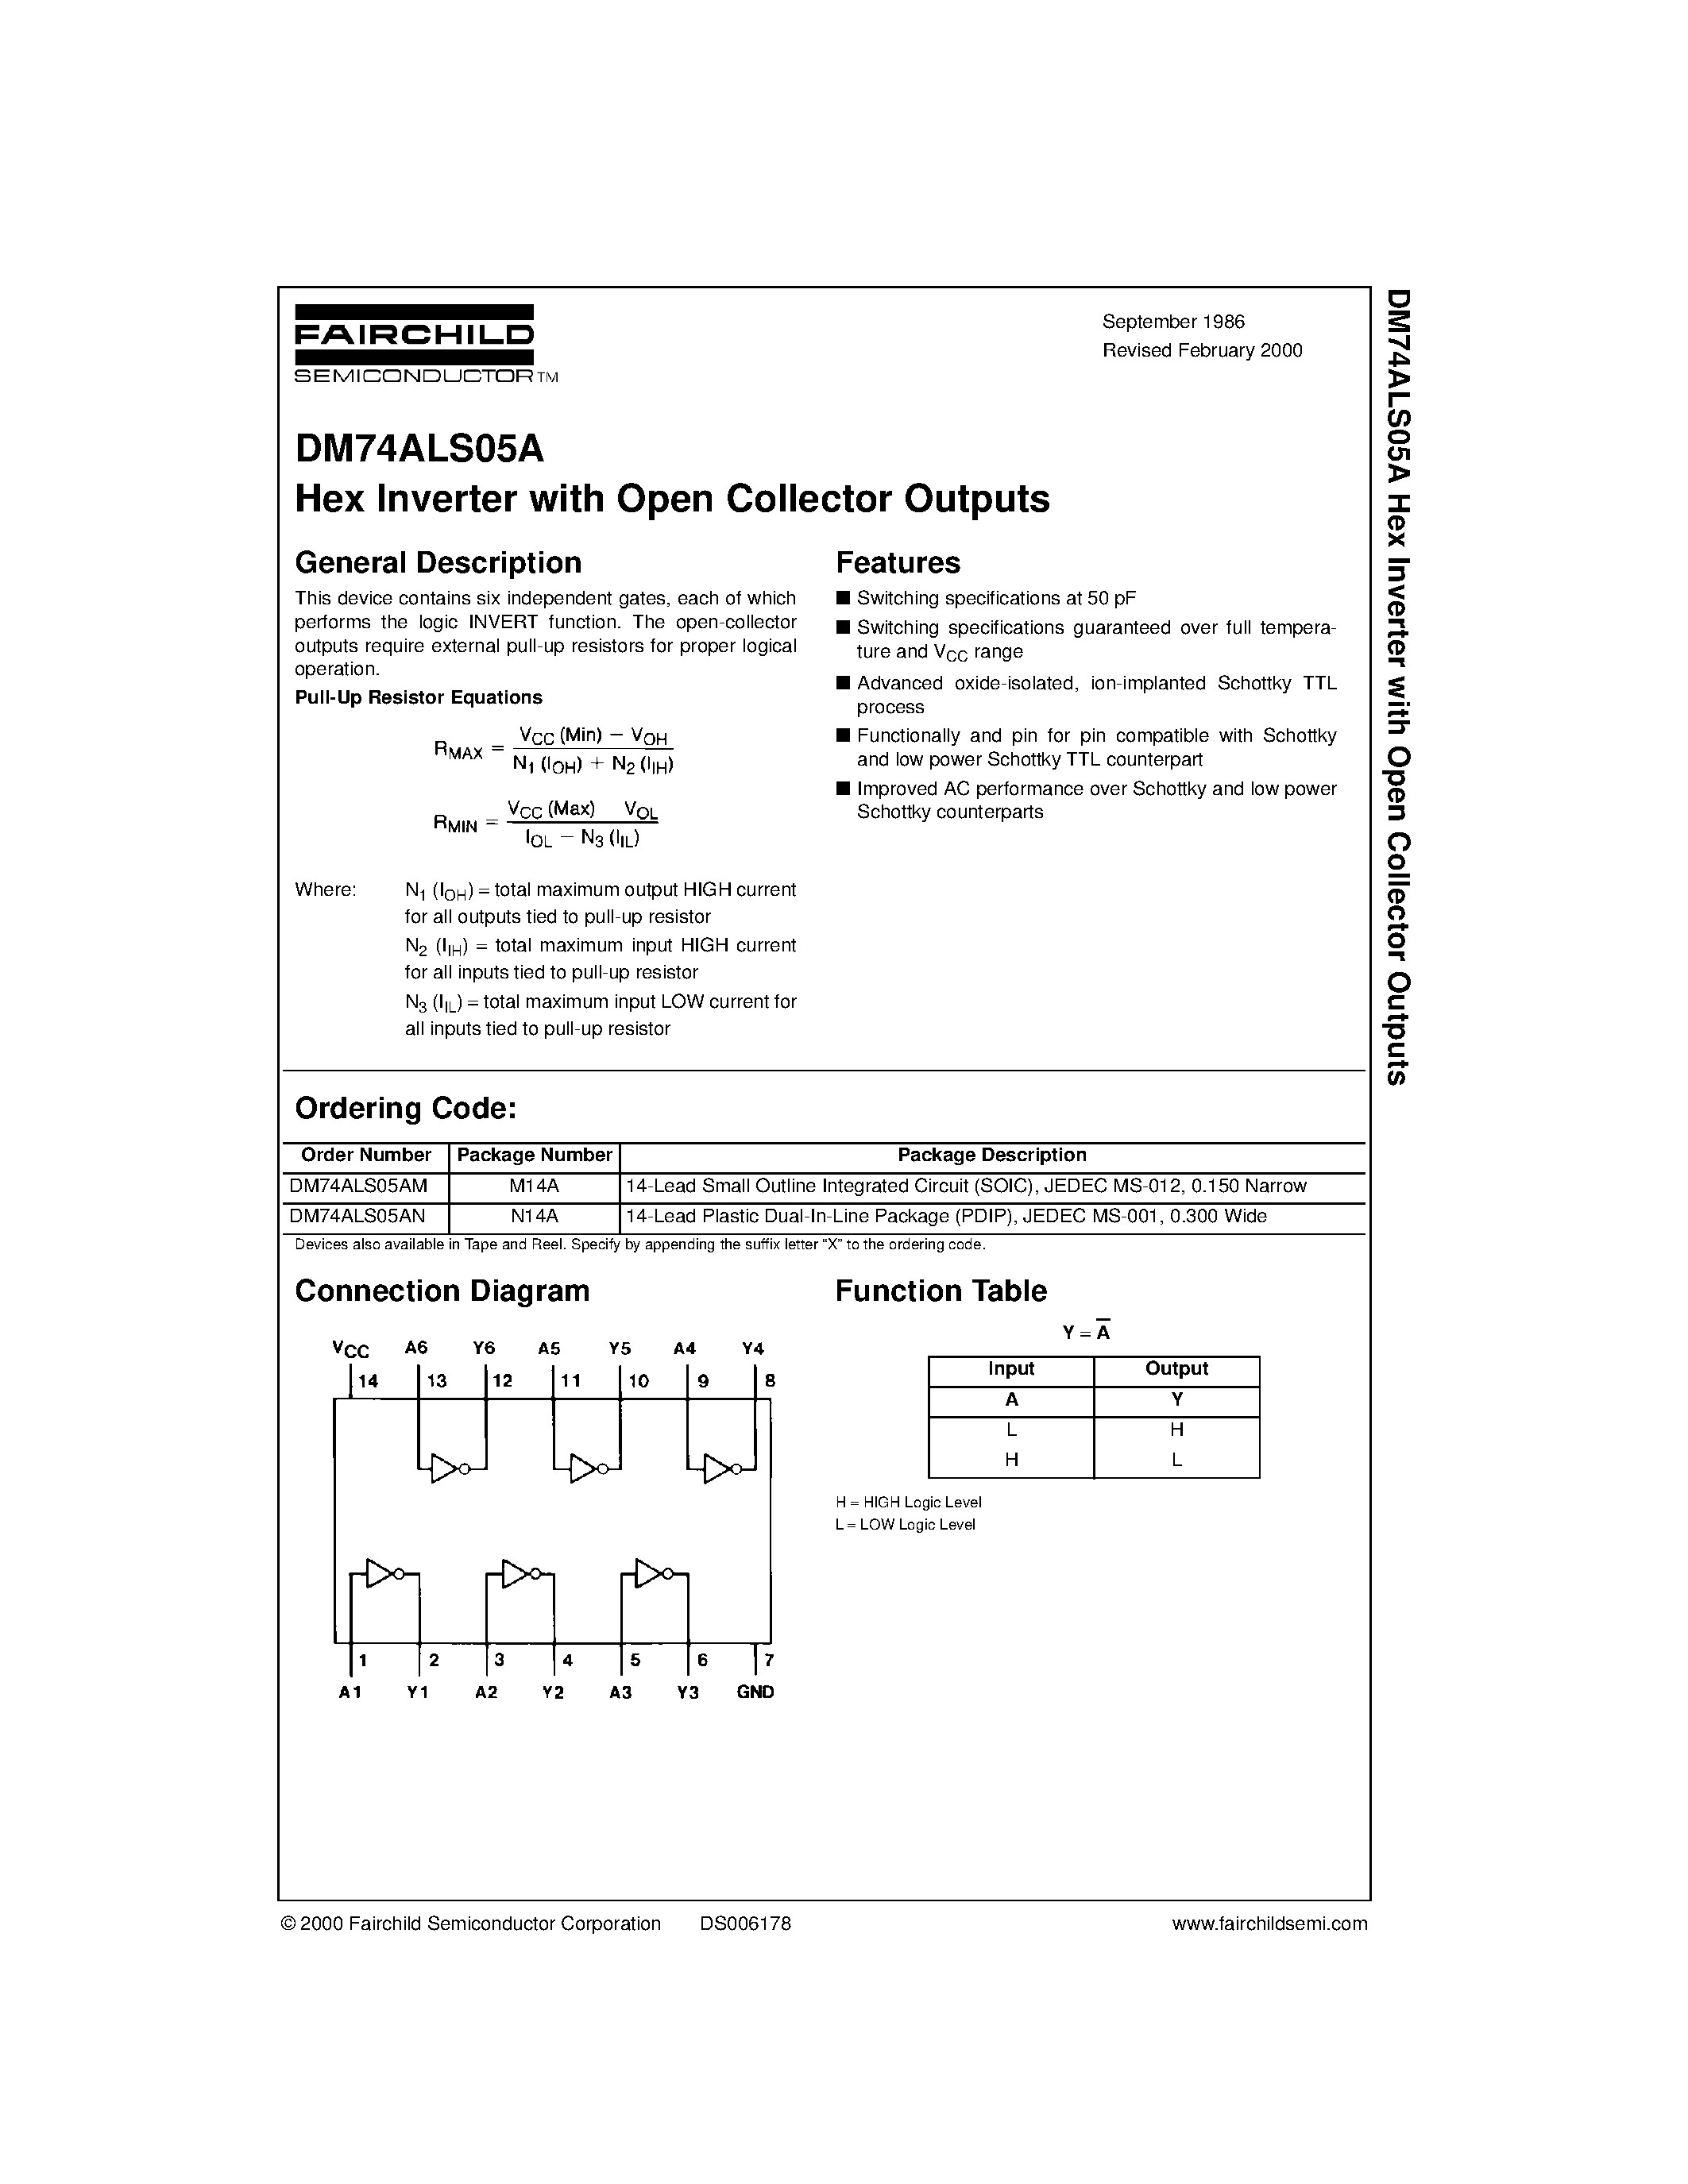 Datasheet DM74ALS05 - Hex Inverter with Open Collector Outputs page 1